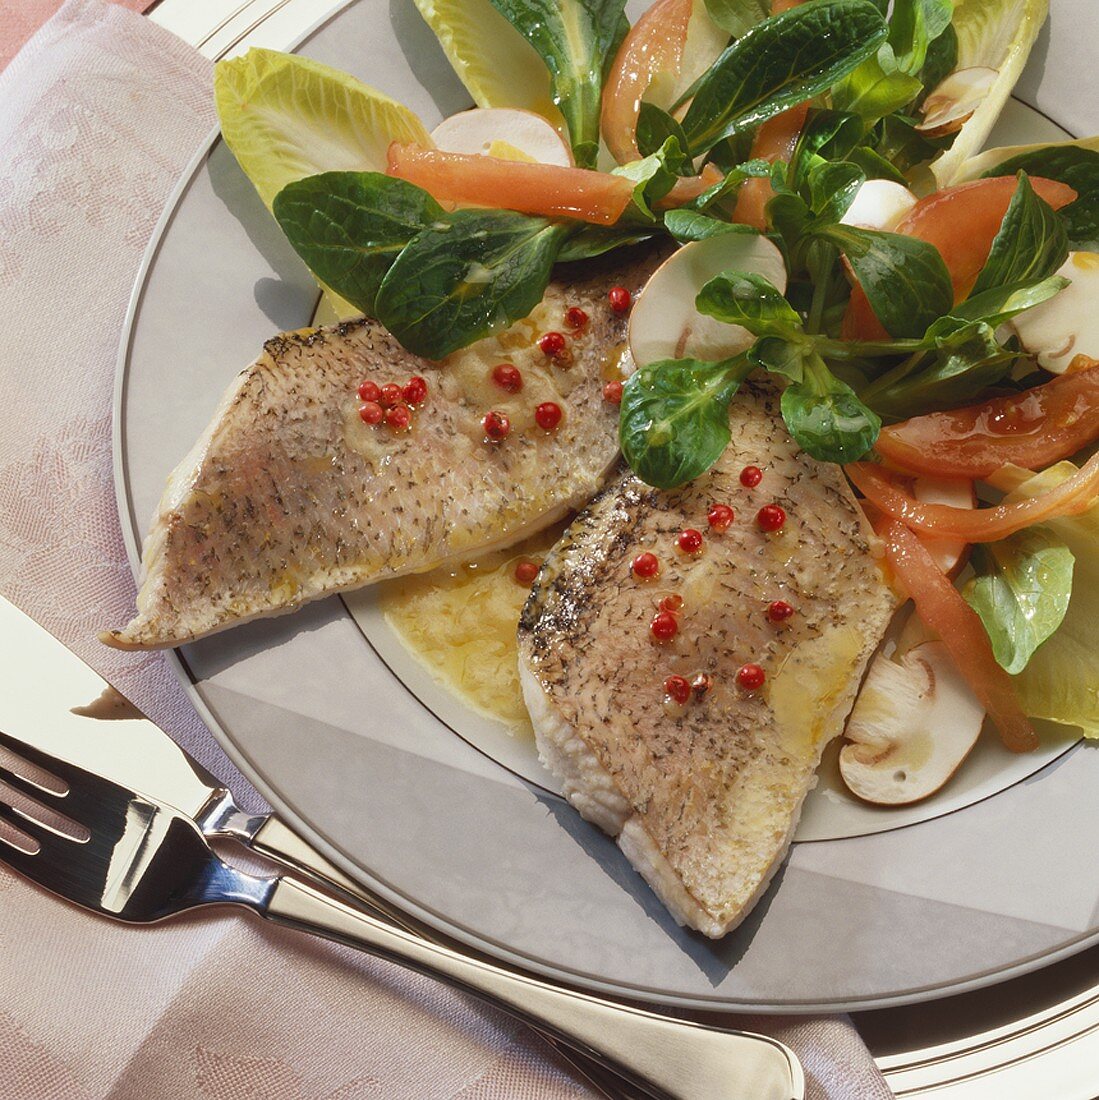 Fillet of pike with red peppercorns on salad